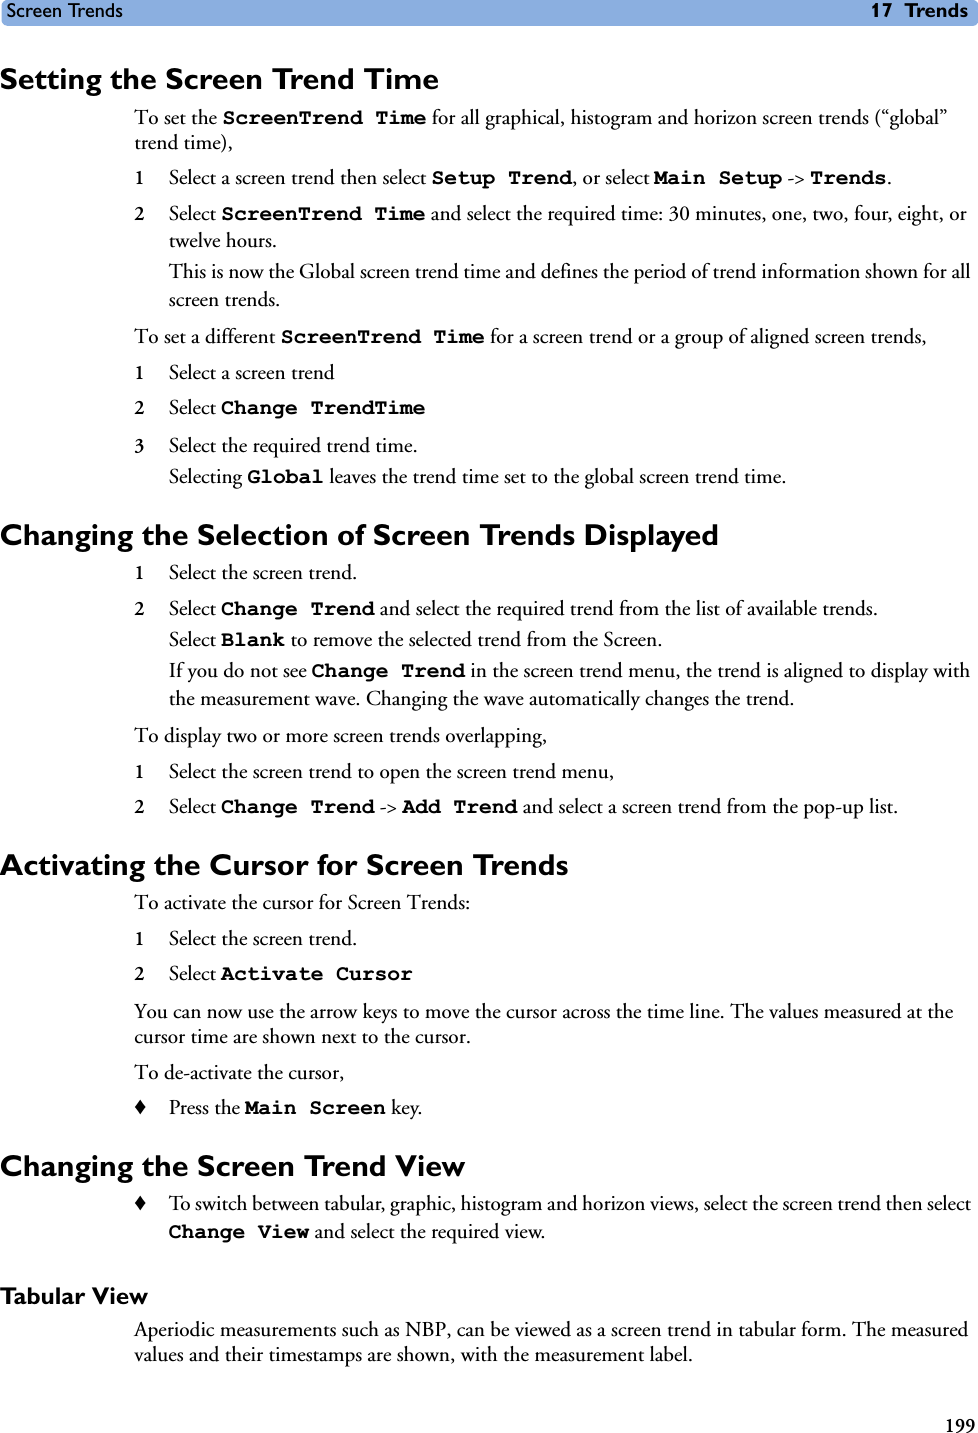 Screen Trends 17 Trends199Setting the Screen Trend TimeTo set the ScreenTrend Time for all graphical, histogram and horizon screen trends (“global” trend time), 1Select a screen trend then select Setup Trend, or select Main Setup -&gt; Trends.2Select ScreenTrend Time and select the required time: 30 minutes, one, two, four, eight, or twelve hours.This is now the Global screen trend time and defines the period of trend information shown for all screen trends. To set a different ScreenTrend Time for a screen trend or a group of aligned screen trends,1Select a screen trend2Select Change TrendTime3Select the required trend time.Selecting Global leaves the trend time set to the global screen trend time. Changing the Selection of Screen Trends Displayed1Select the screen trend.2Select Change Trend and select the required trend from the list of available trends.Select Blank to remove the selected trend from the Screen. If you do not see Change Trend in the screen trend menu, the trend is aligned to display with the measurement wave. Changing the wave automatically changes the trend. To display two or more screen trends overlapping, 1Select the screen trend to open the screen trend menu, 2Select Change Trend -&gt; Add Trend and select a screen trend from the pop-up list. Activating the Cursor for Screen TrendsTo activate the cursor for Screen Trends:1Select the screen trend.2Select Activate CursorYou can now use the arrow keys to move the cursor across the time line. The values measured at the cursor time are shown next to the cursor. To de-activate the cursor,♦Press the Main Screen key.Changing the Screen Trend View ♦To switch between tabular, graphic, histogram and horizon views, select the screen trend then select Change View and select the required view. Tabular ViewAperiodic measurements such as NBP, can be viewed as a screen trend in tabular form. The measured values and their timestamps are shown, with the measurement label.